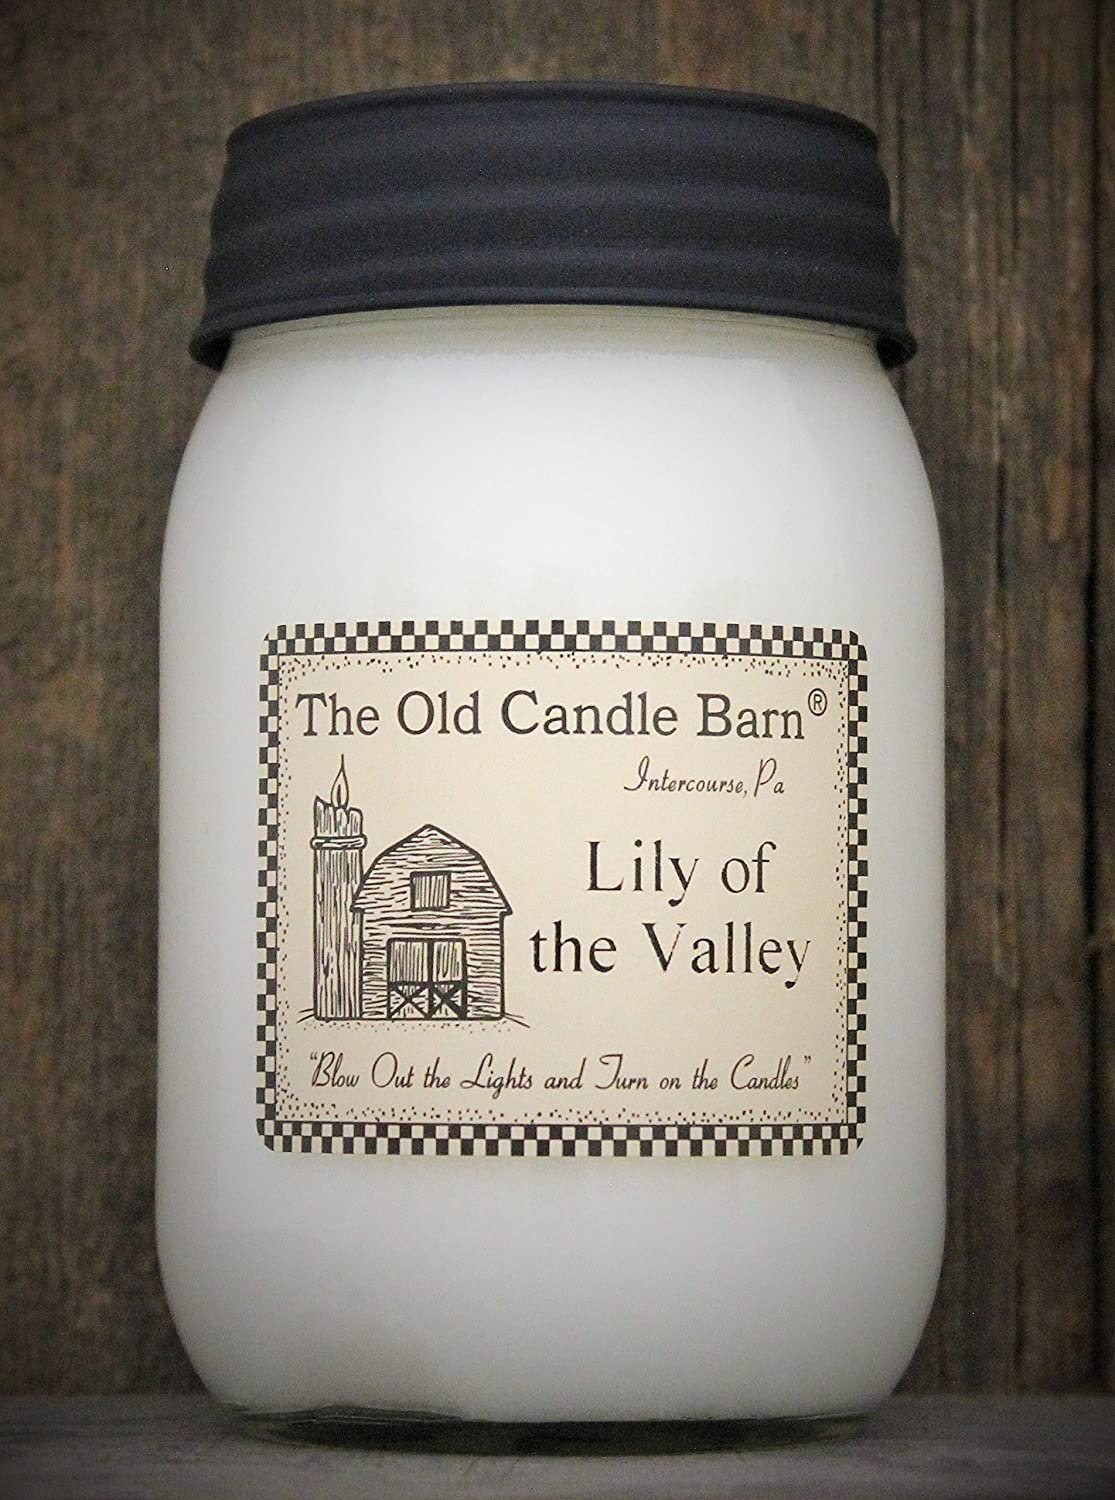 Lily of The Valley 16 Oz Jar Candle - Made in The USA - Blow Out The Light and Turn On The Candles!